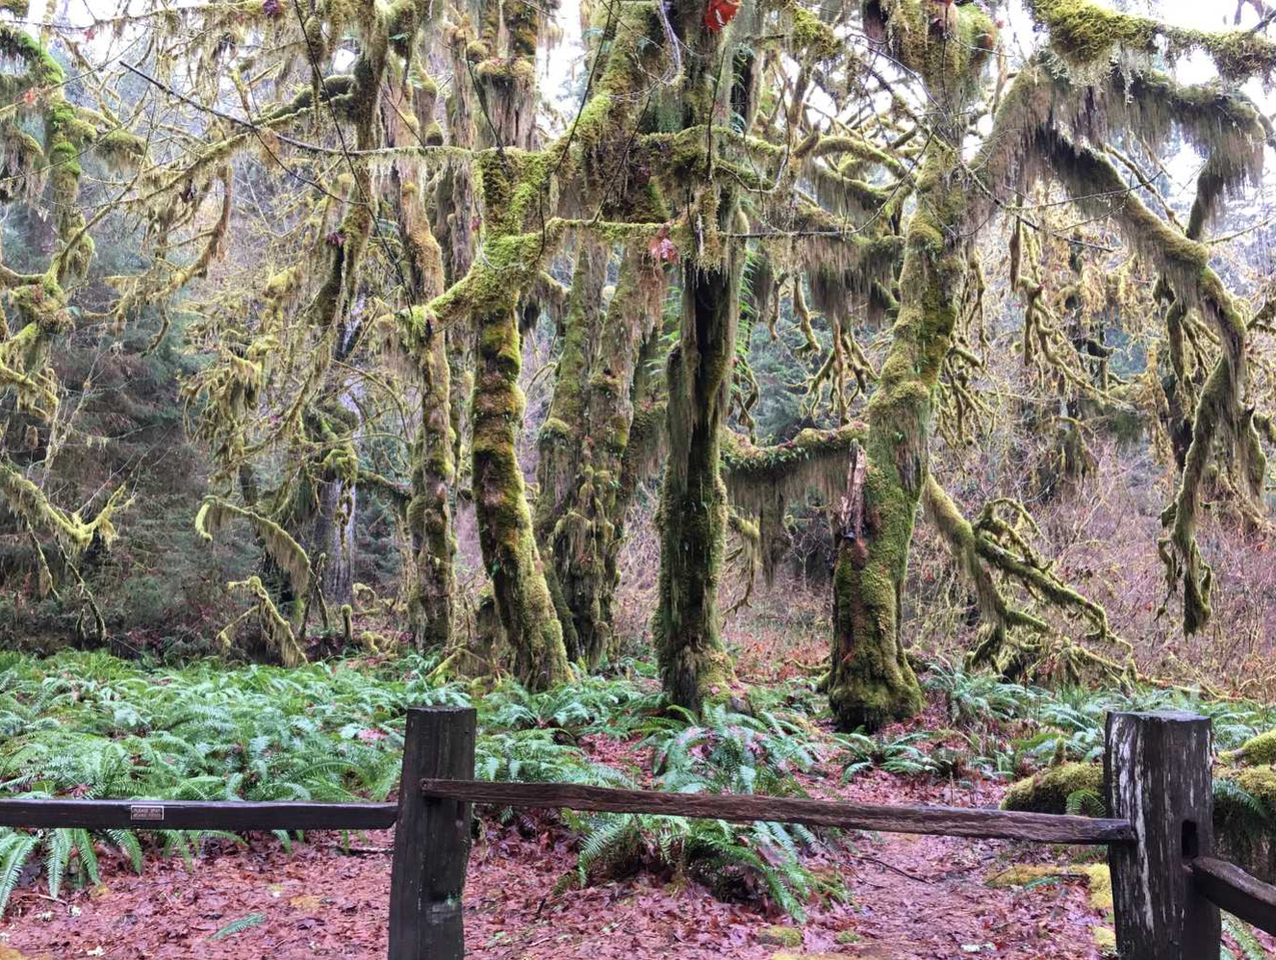 Moss-covered trees in Olympic National Park temperate rainforest surrounded by fall leaves on the ground.